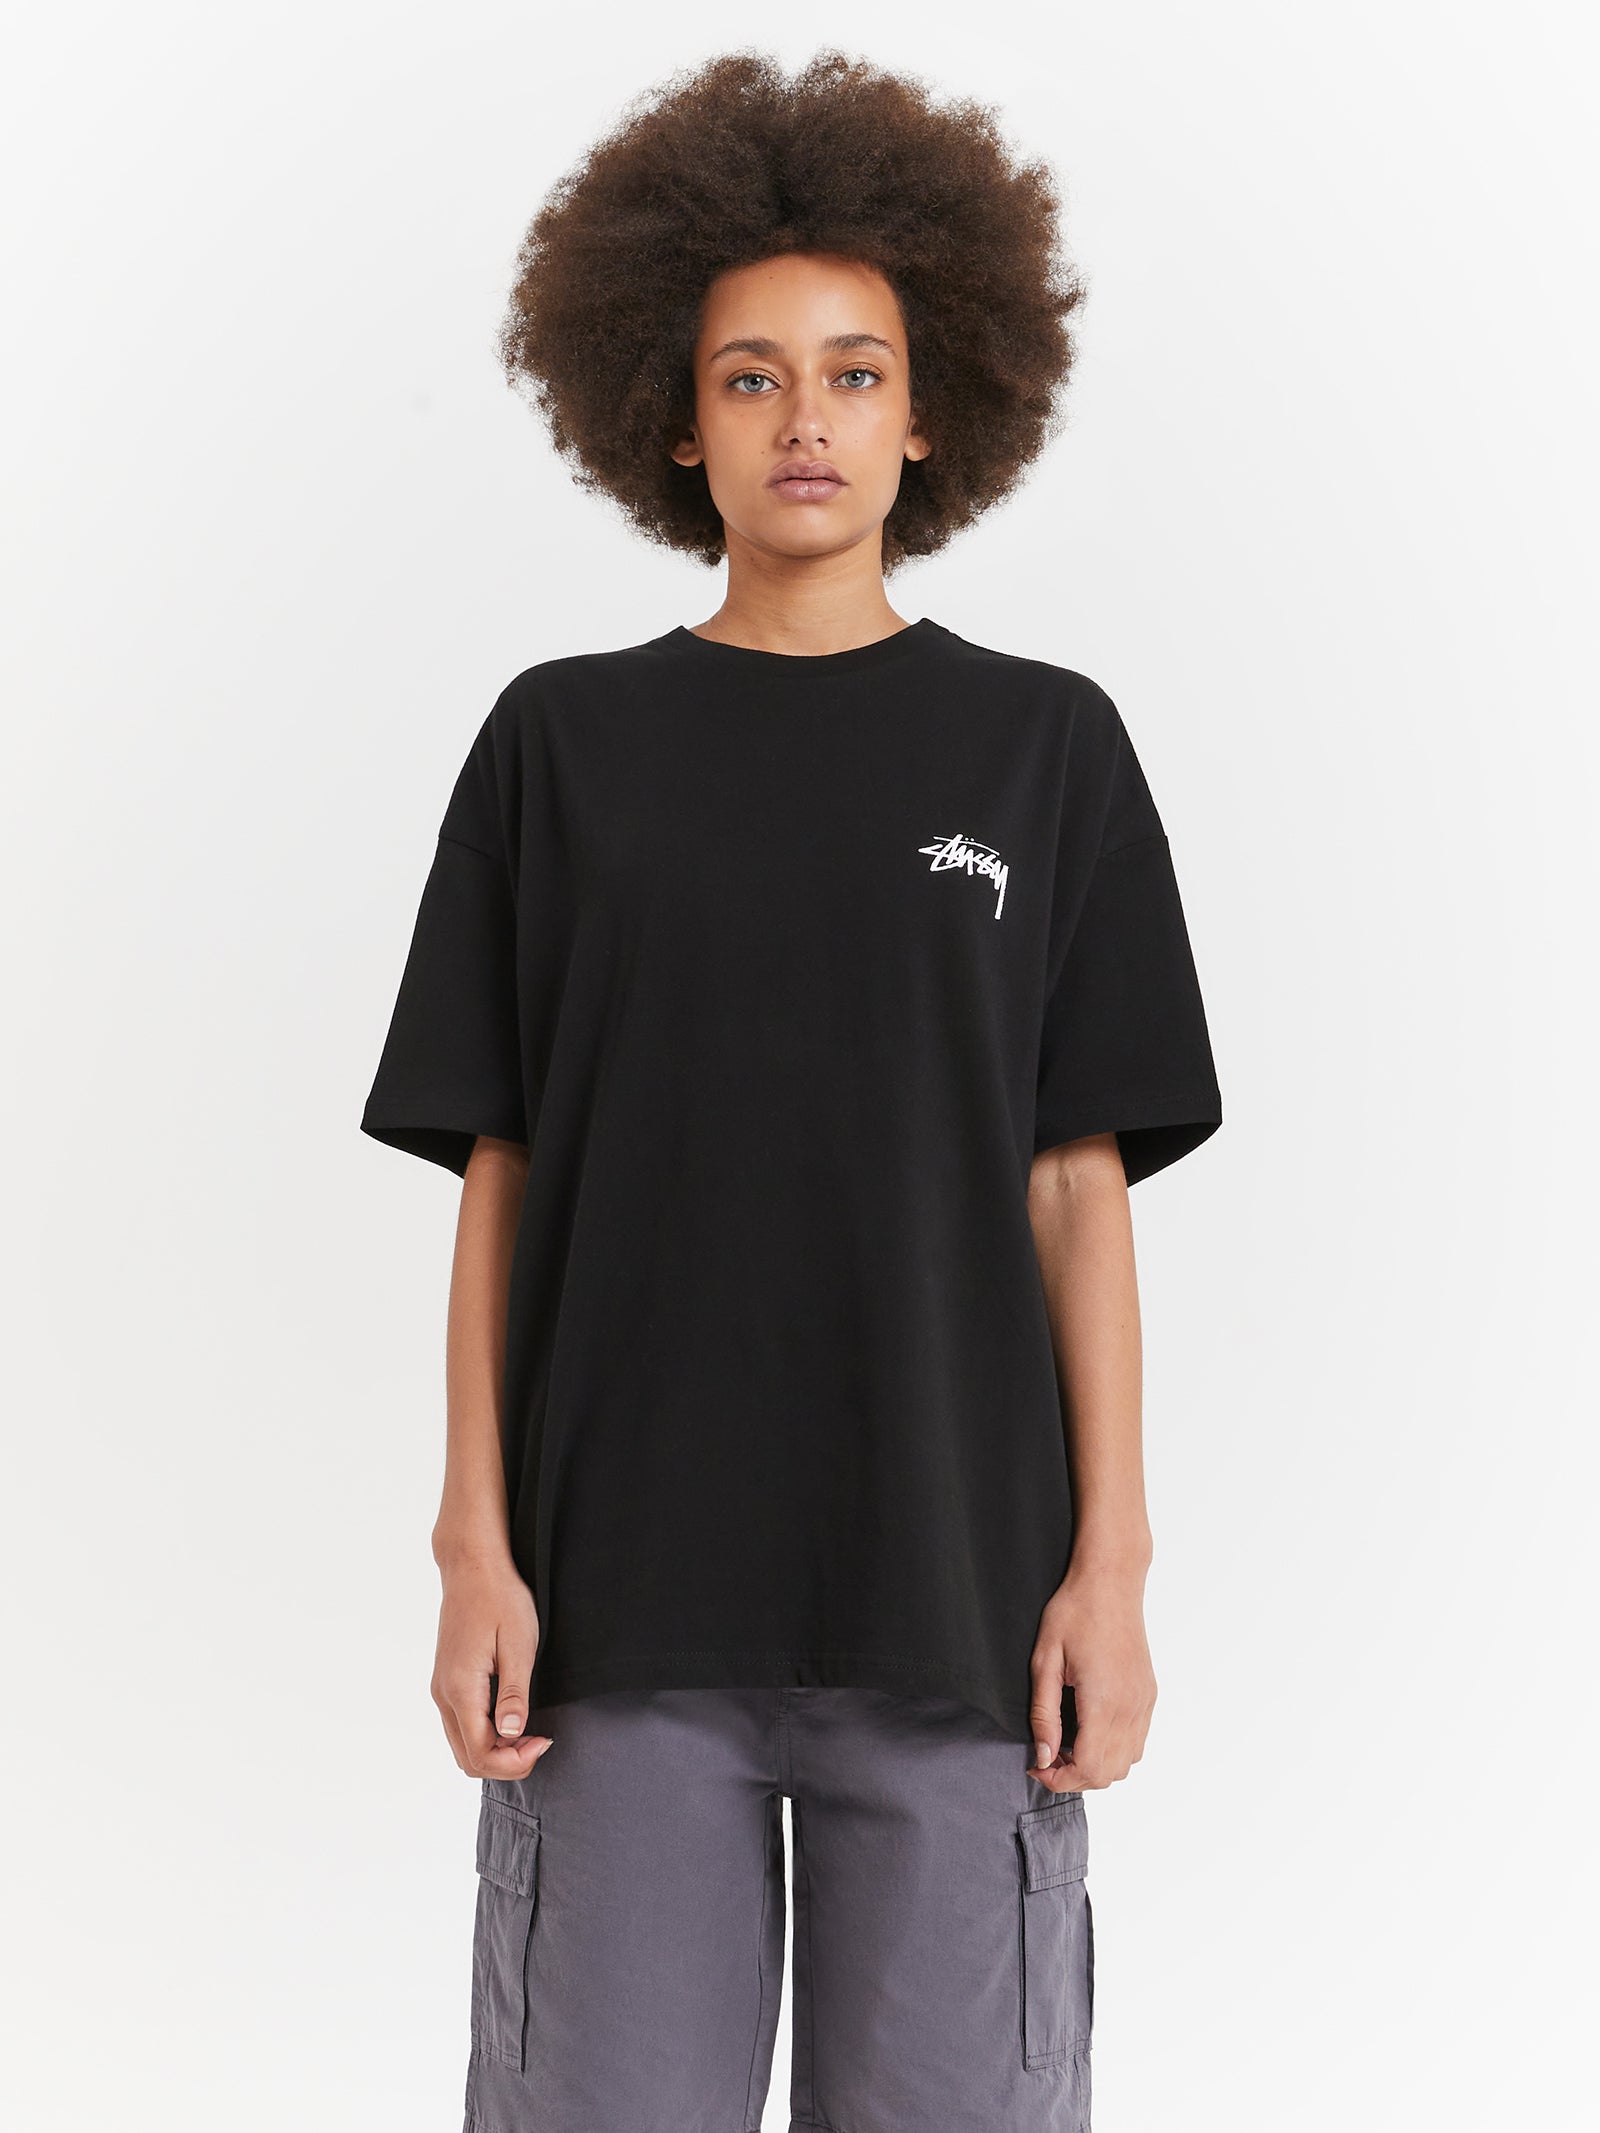 Pair Of Dice Heavyweight Relaxed T-Shirt in Black - Glue Store